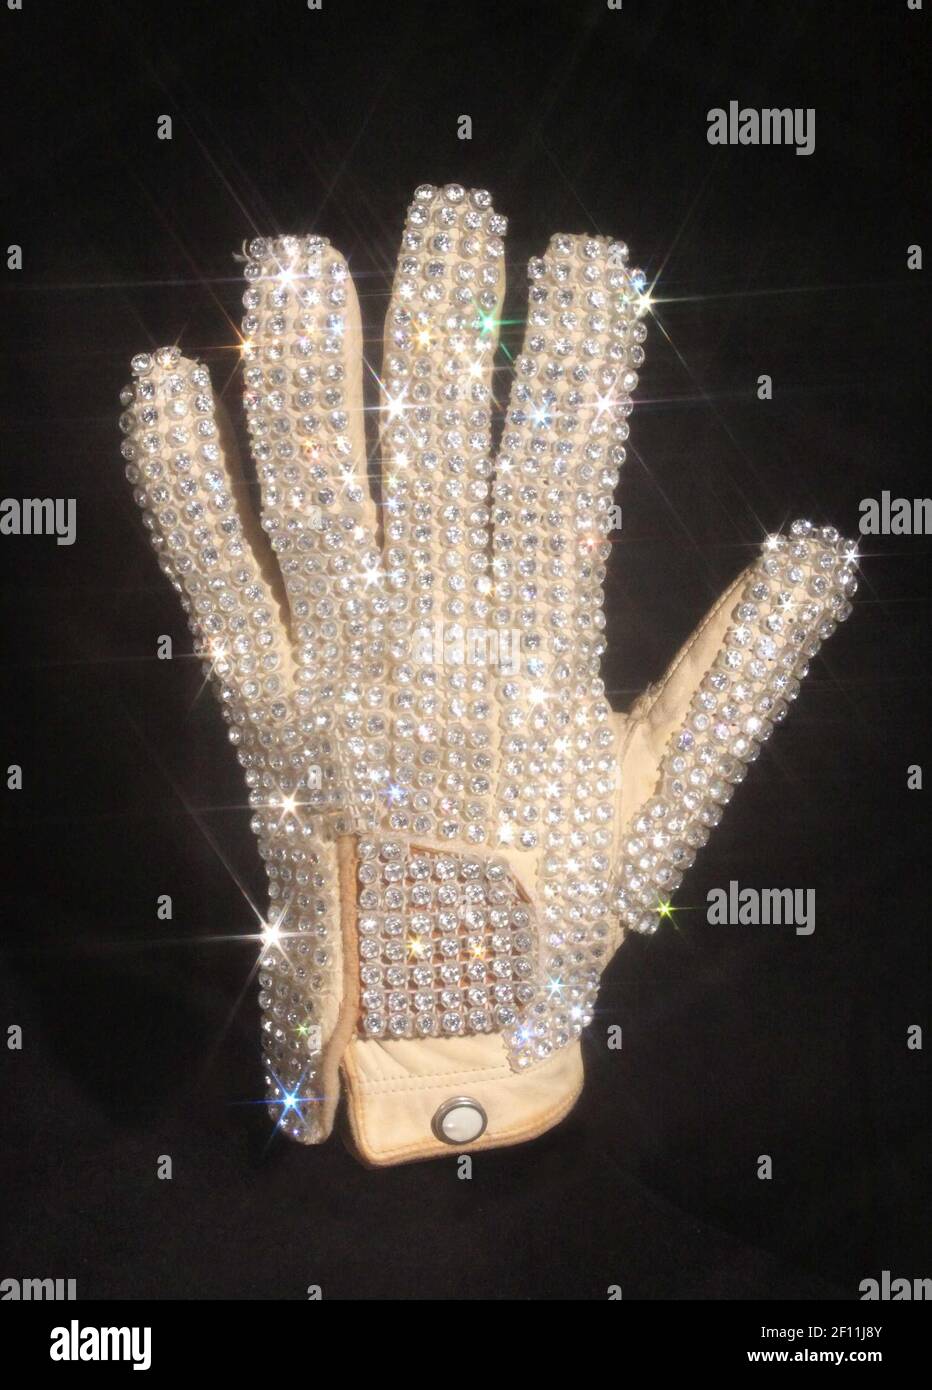 November 2009 - New York, NY - Michael Jackson's glove from his 1983 performance of Billie Jean at the Motown 25 television special where he performed the Moonwalk for the first time. Photo Credit: Julien's Auctions/Sipa Press/0911132141 Stock Photo